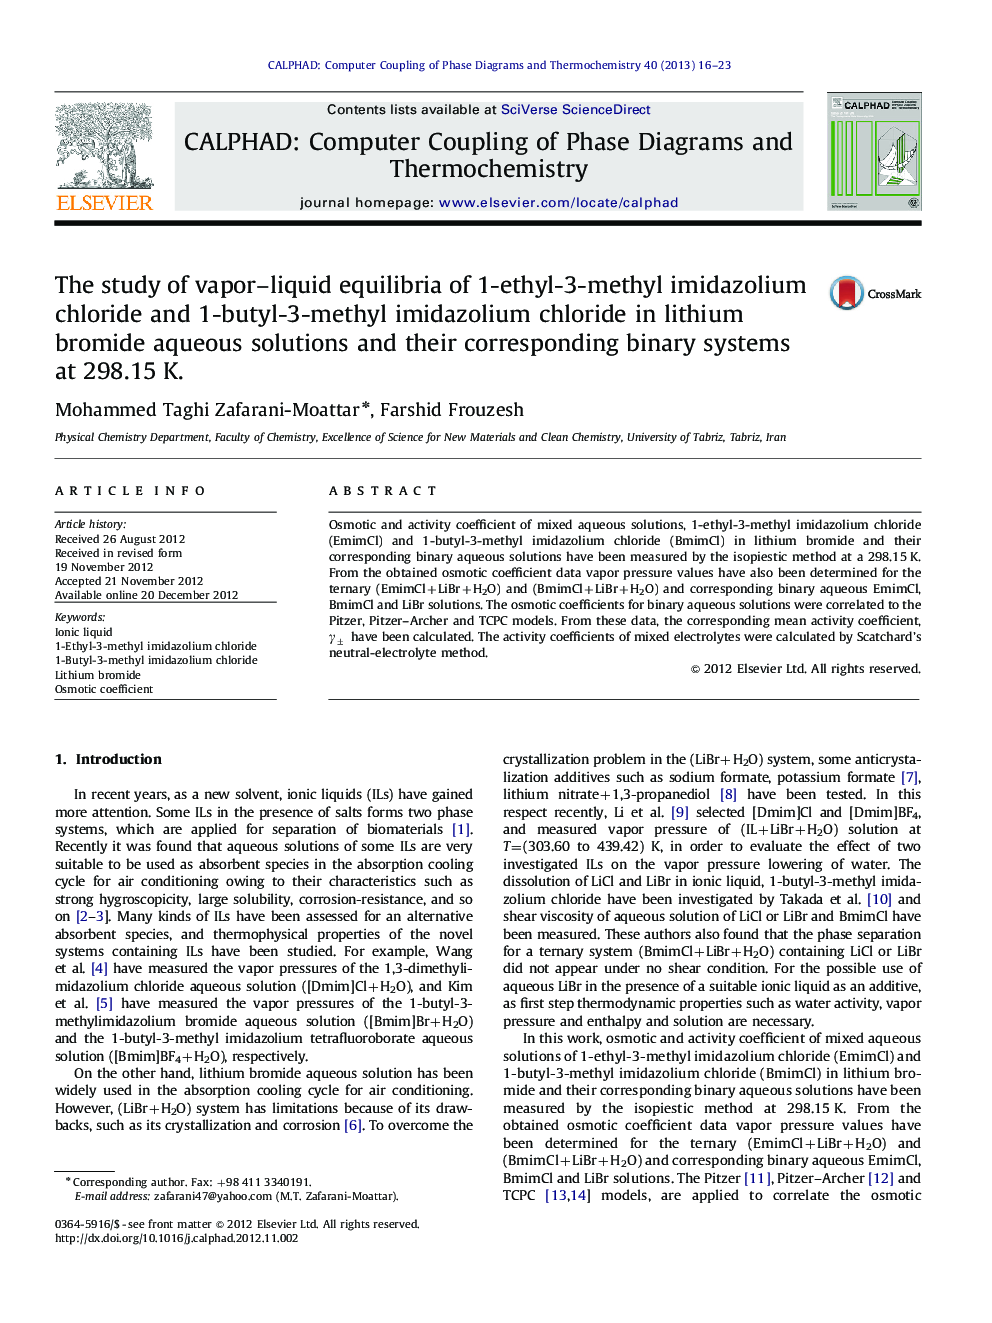 The study of vapor-liquid equilibria of 1-ethyl-3-methyl imidazolium chloride and 1-butyl-3-methyl imidazolium chloride in lithium bromide aqueous solutions and their corresponding binary systems at 298.15Â K.